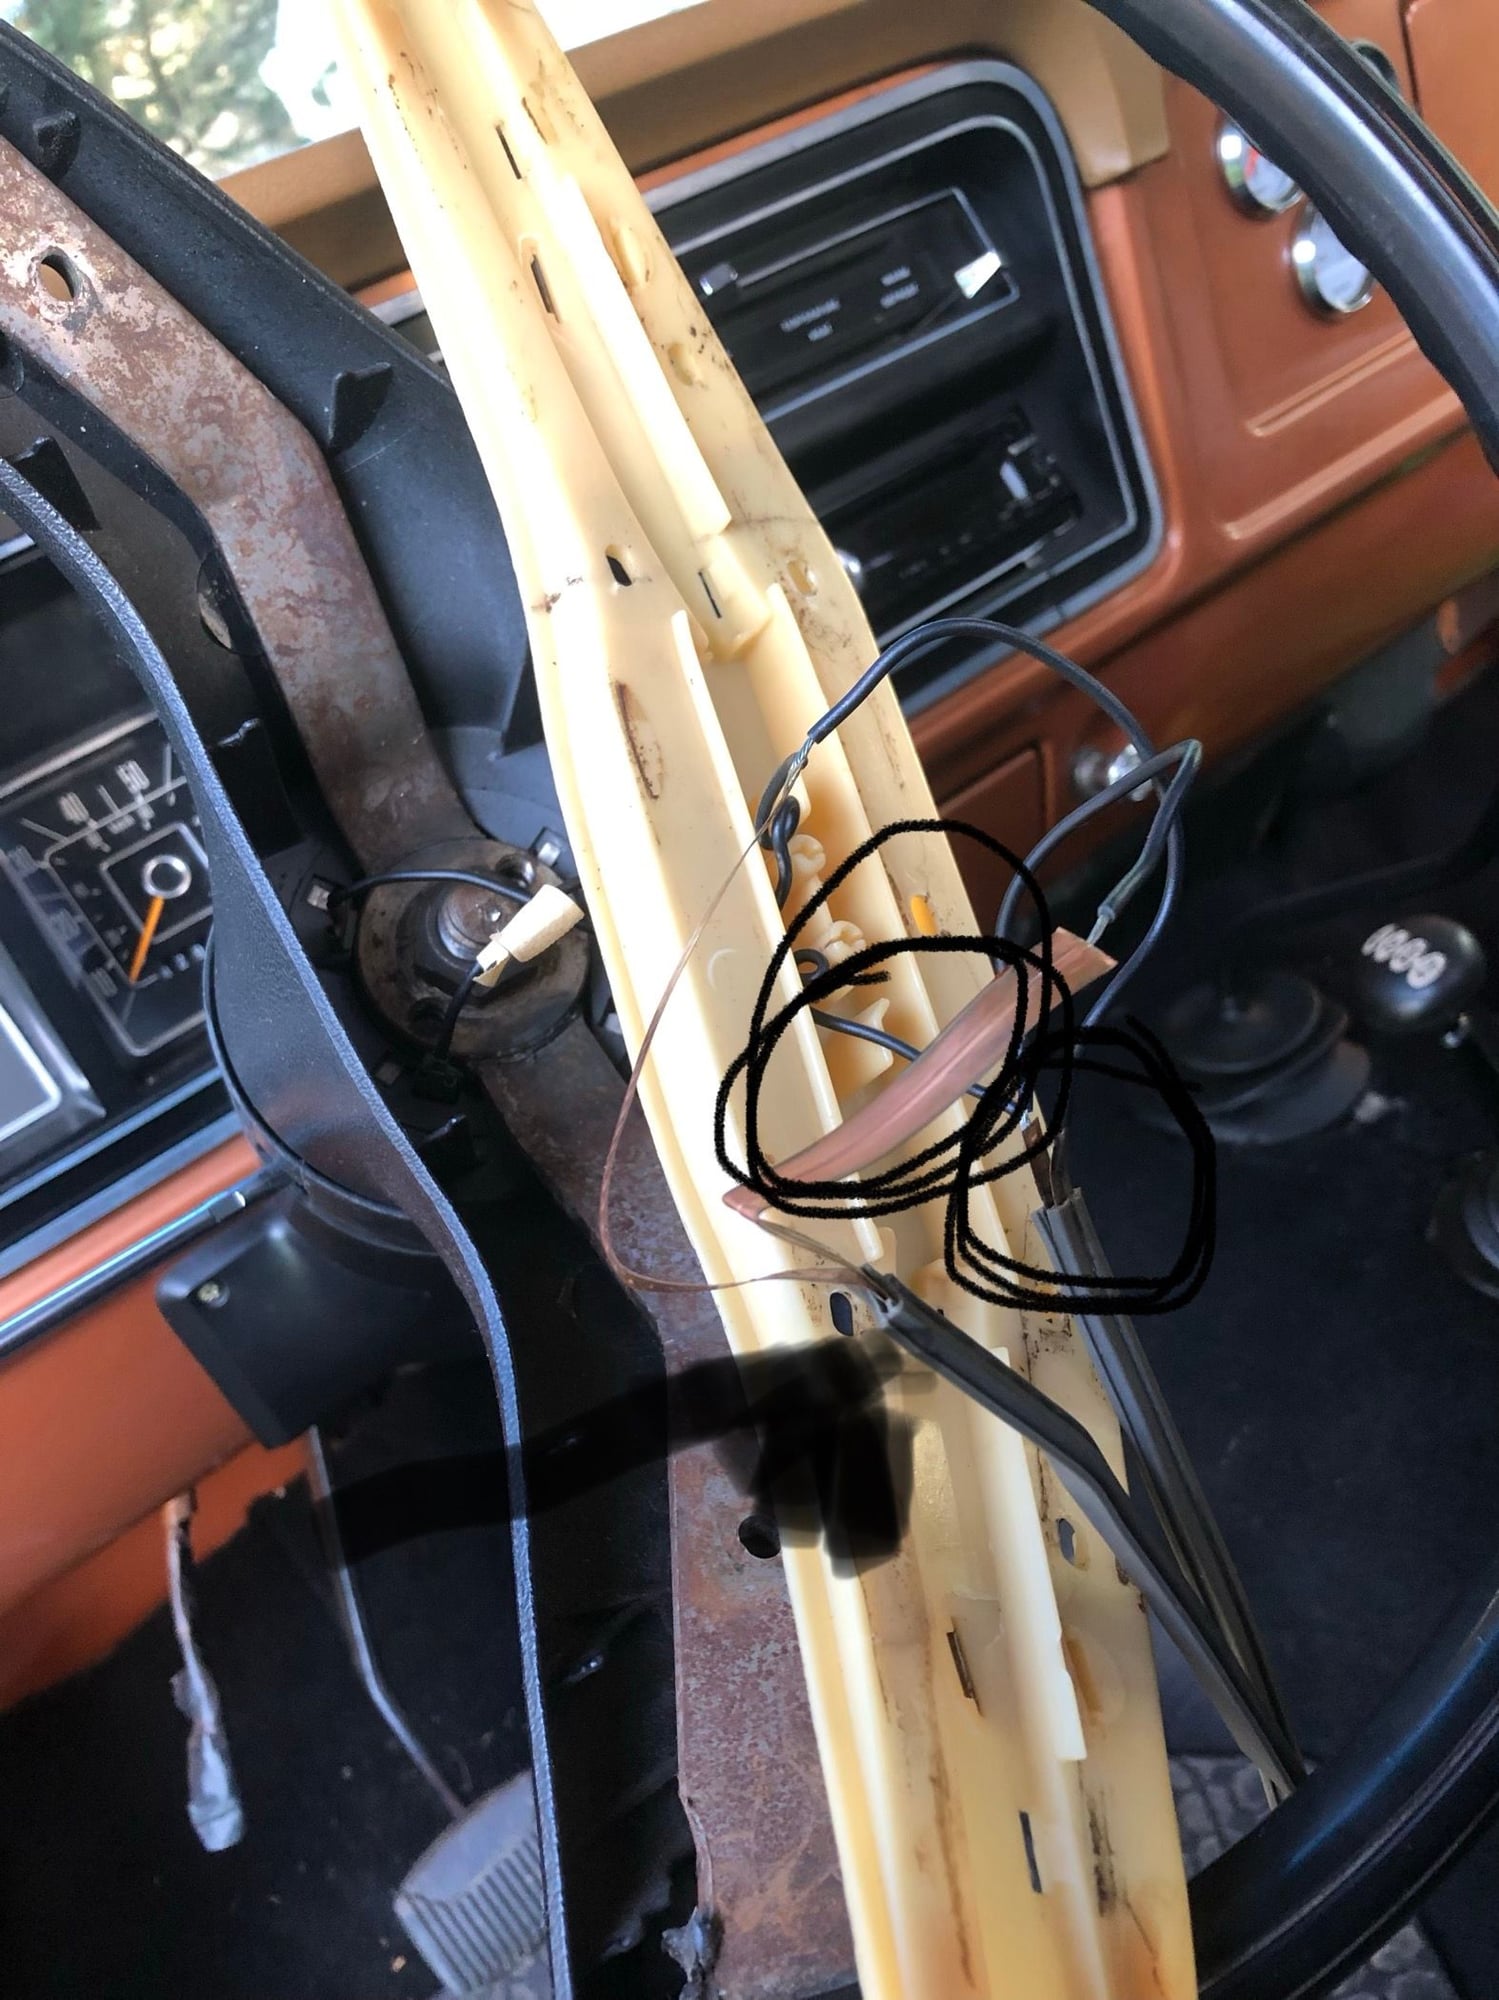 Horn wiring - Page 2 - Ford Truck Enthusiasts Forums